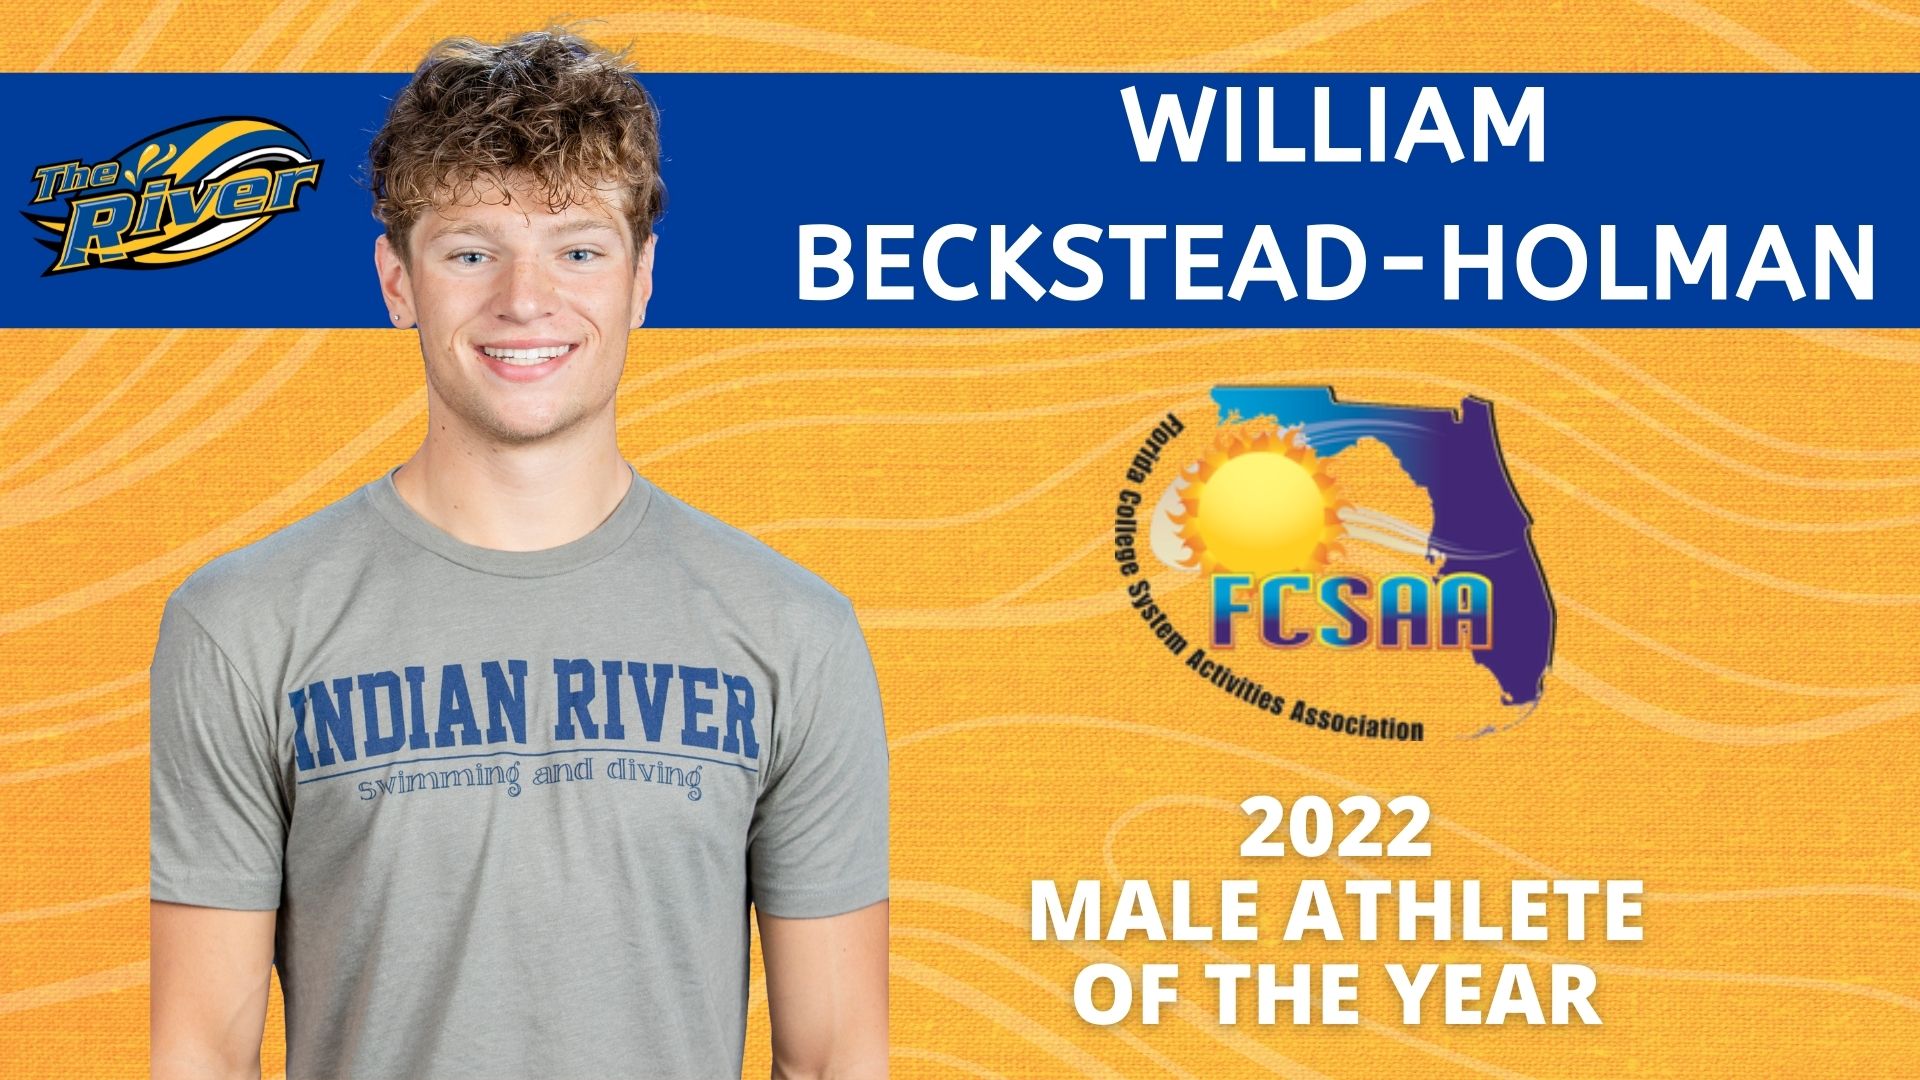 Beckstead-Holman named 2022 FCSAA Male Athlete of the Year